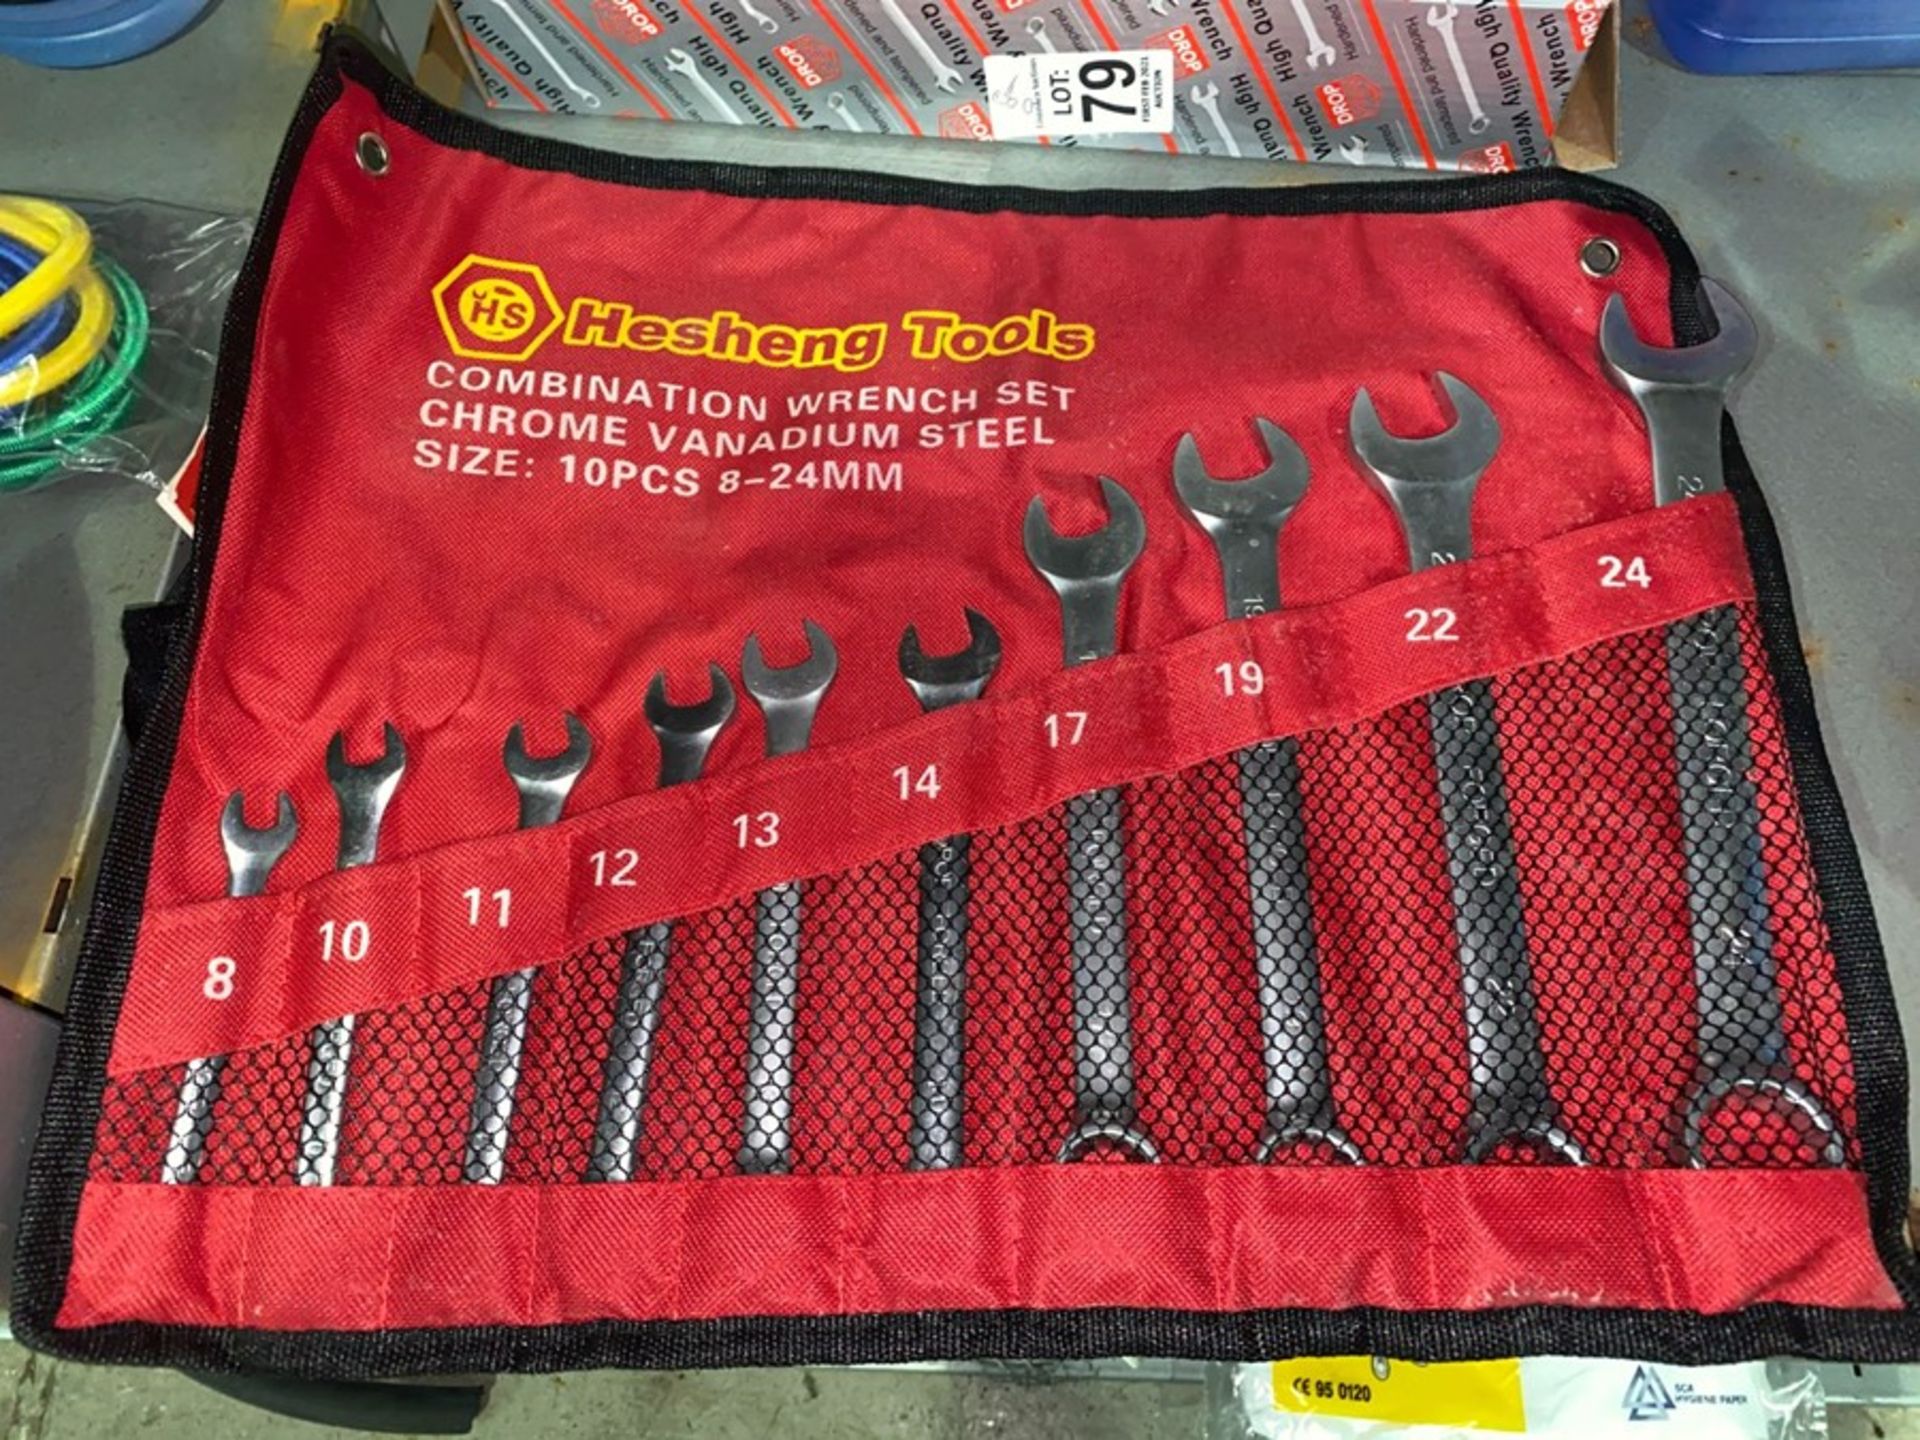 10PC COMBINATION WRENCH SET (NEW)